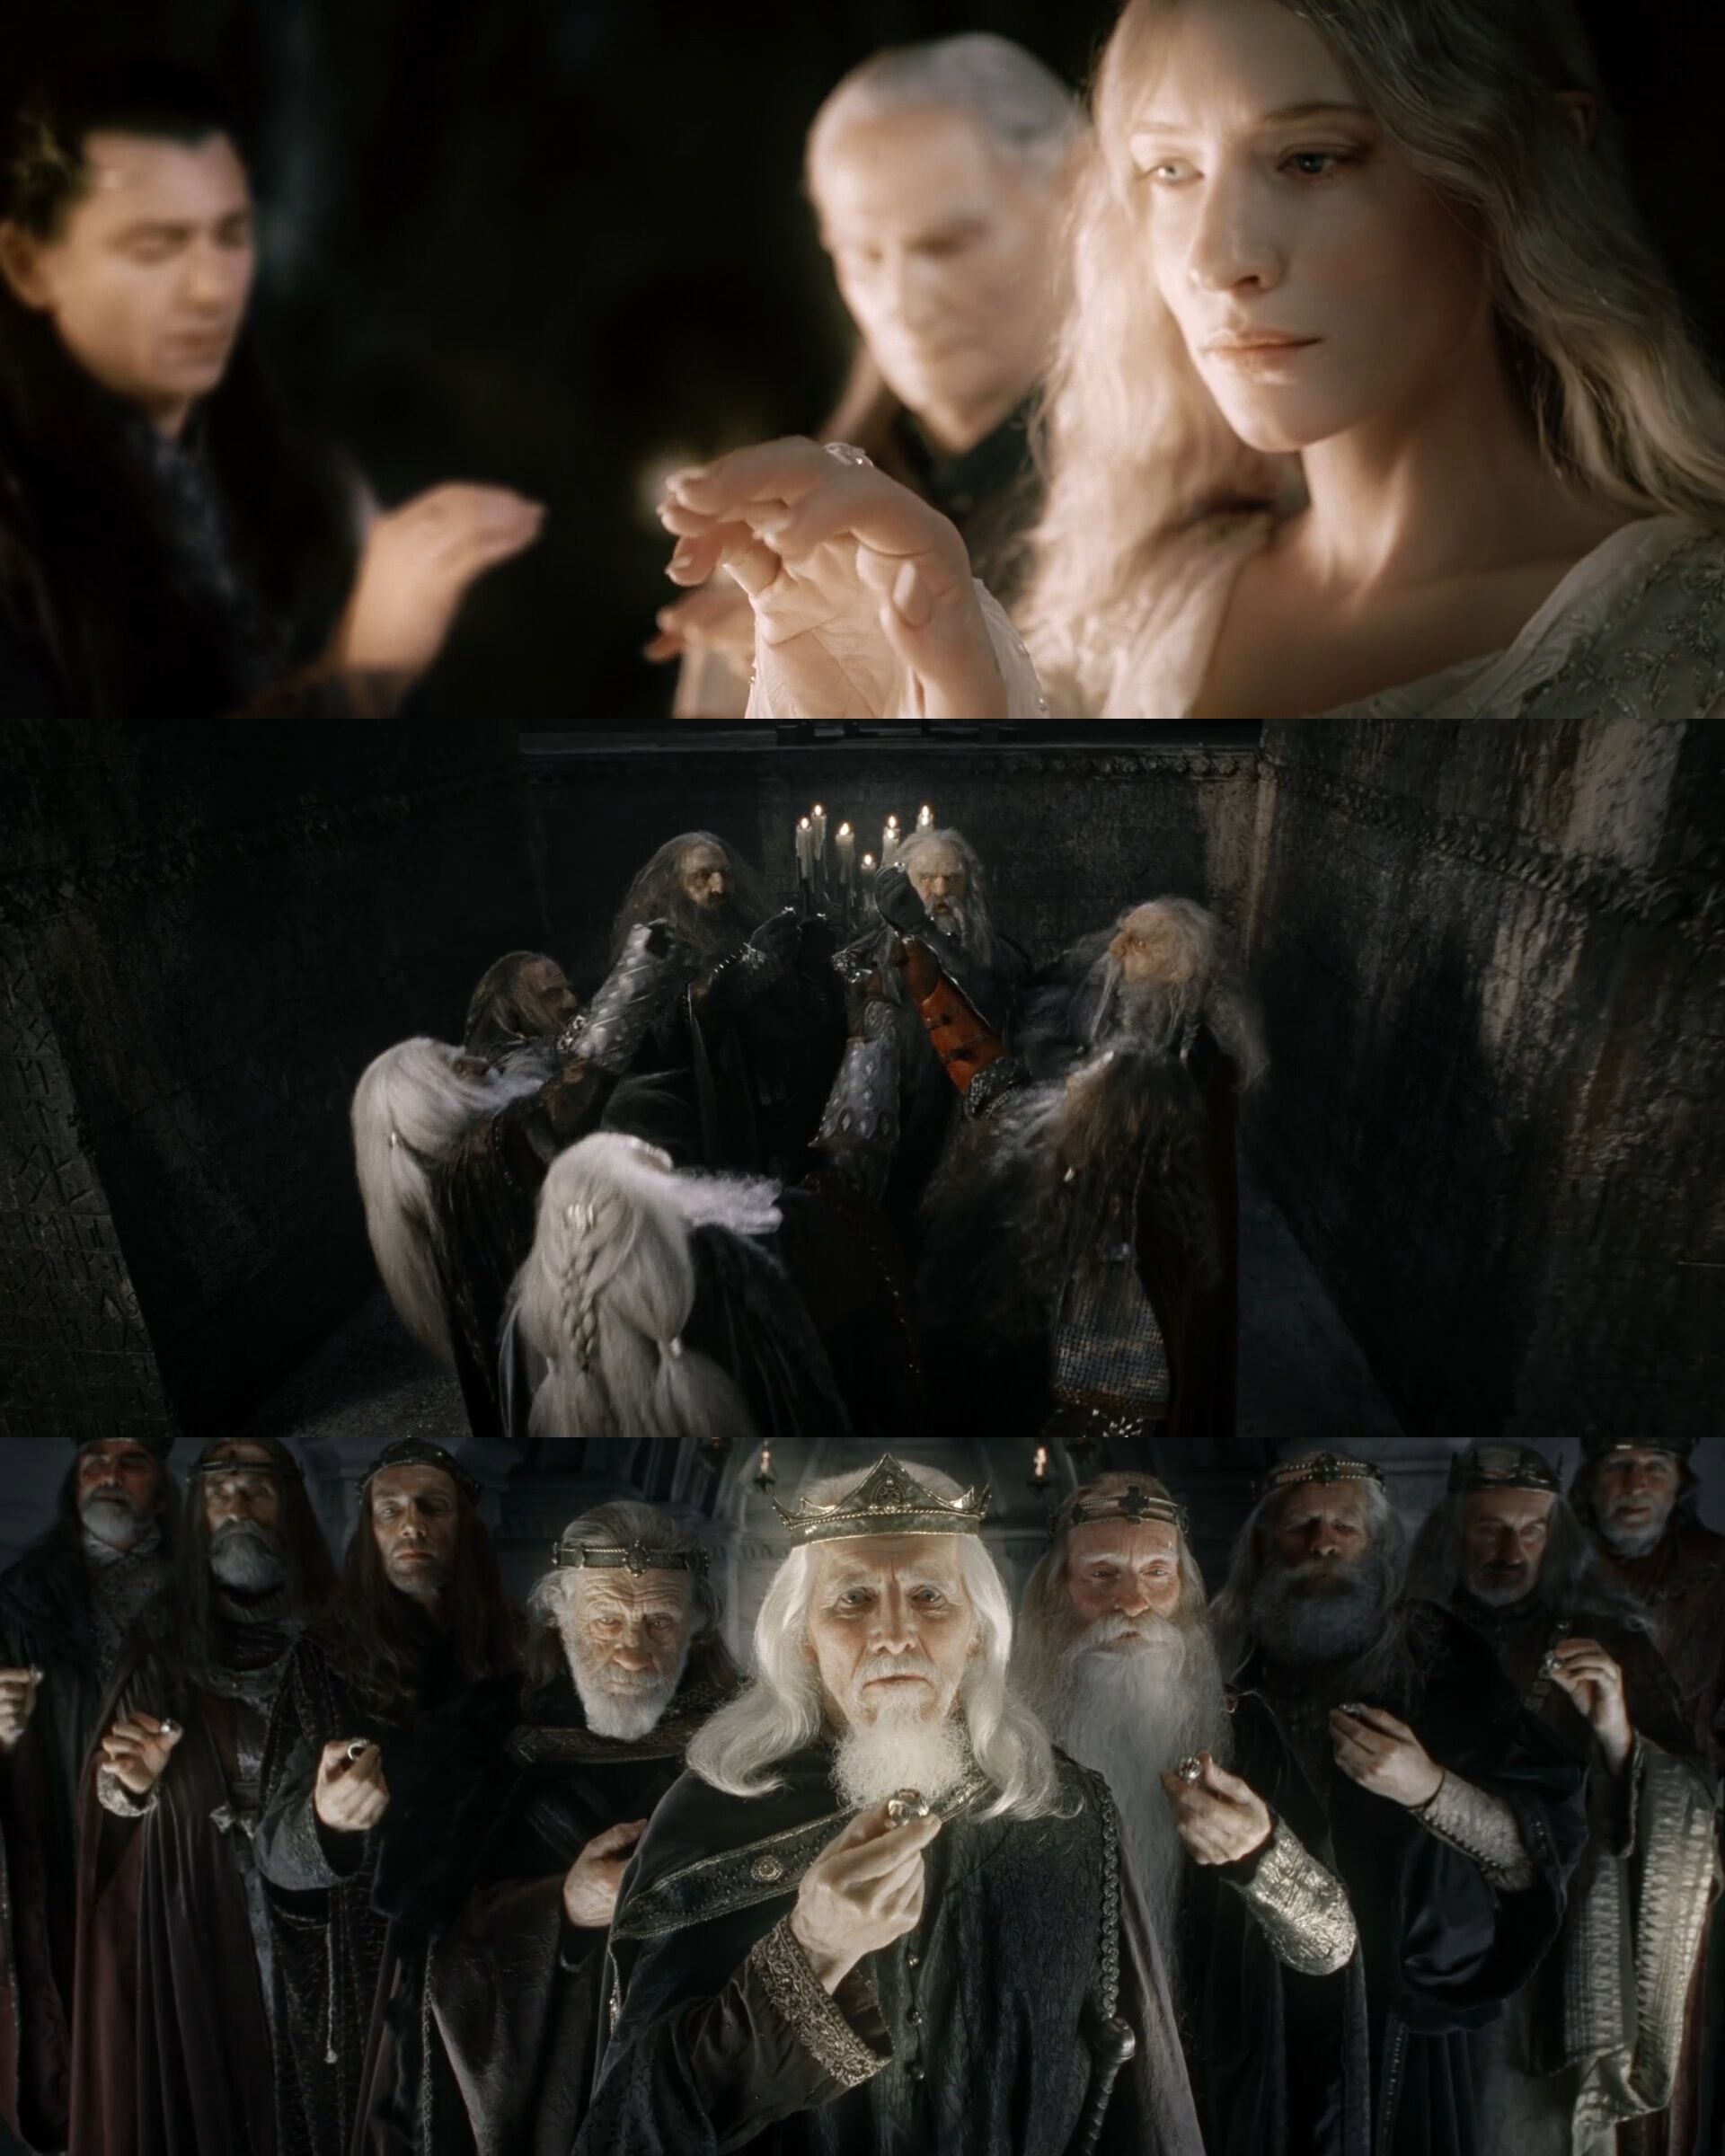 Council of Elrond » LotR News & Information » Glaurung´s Death